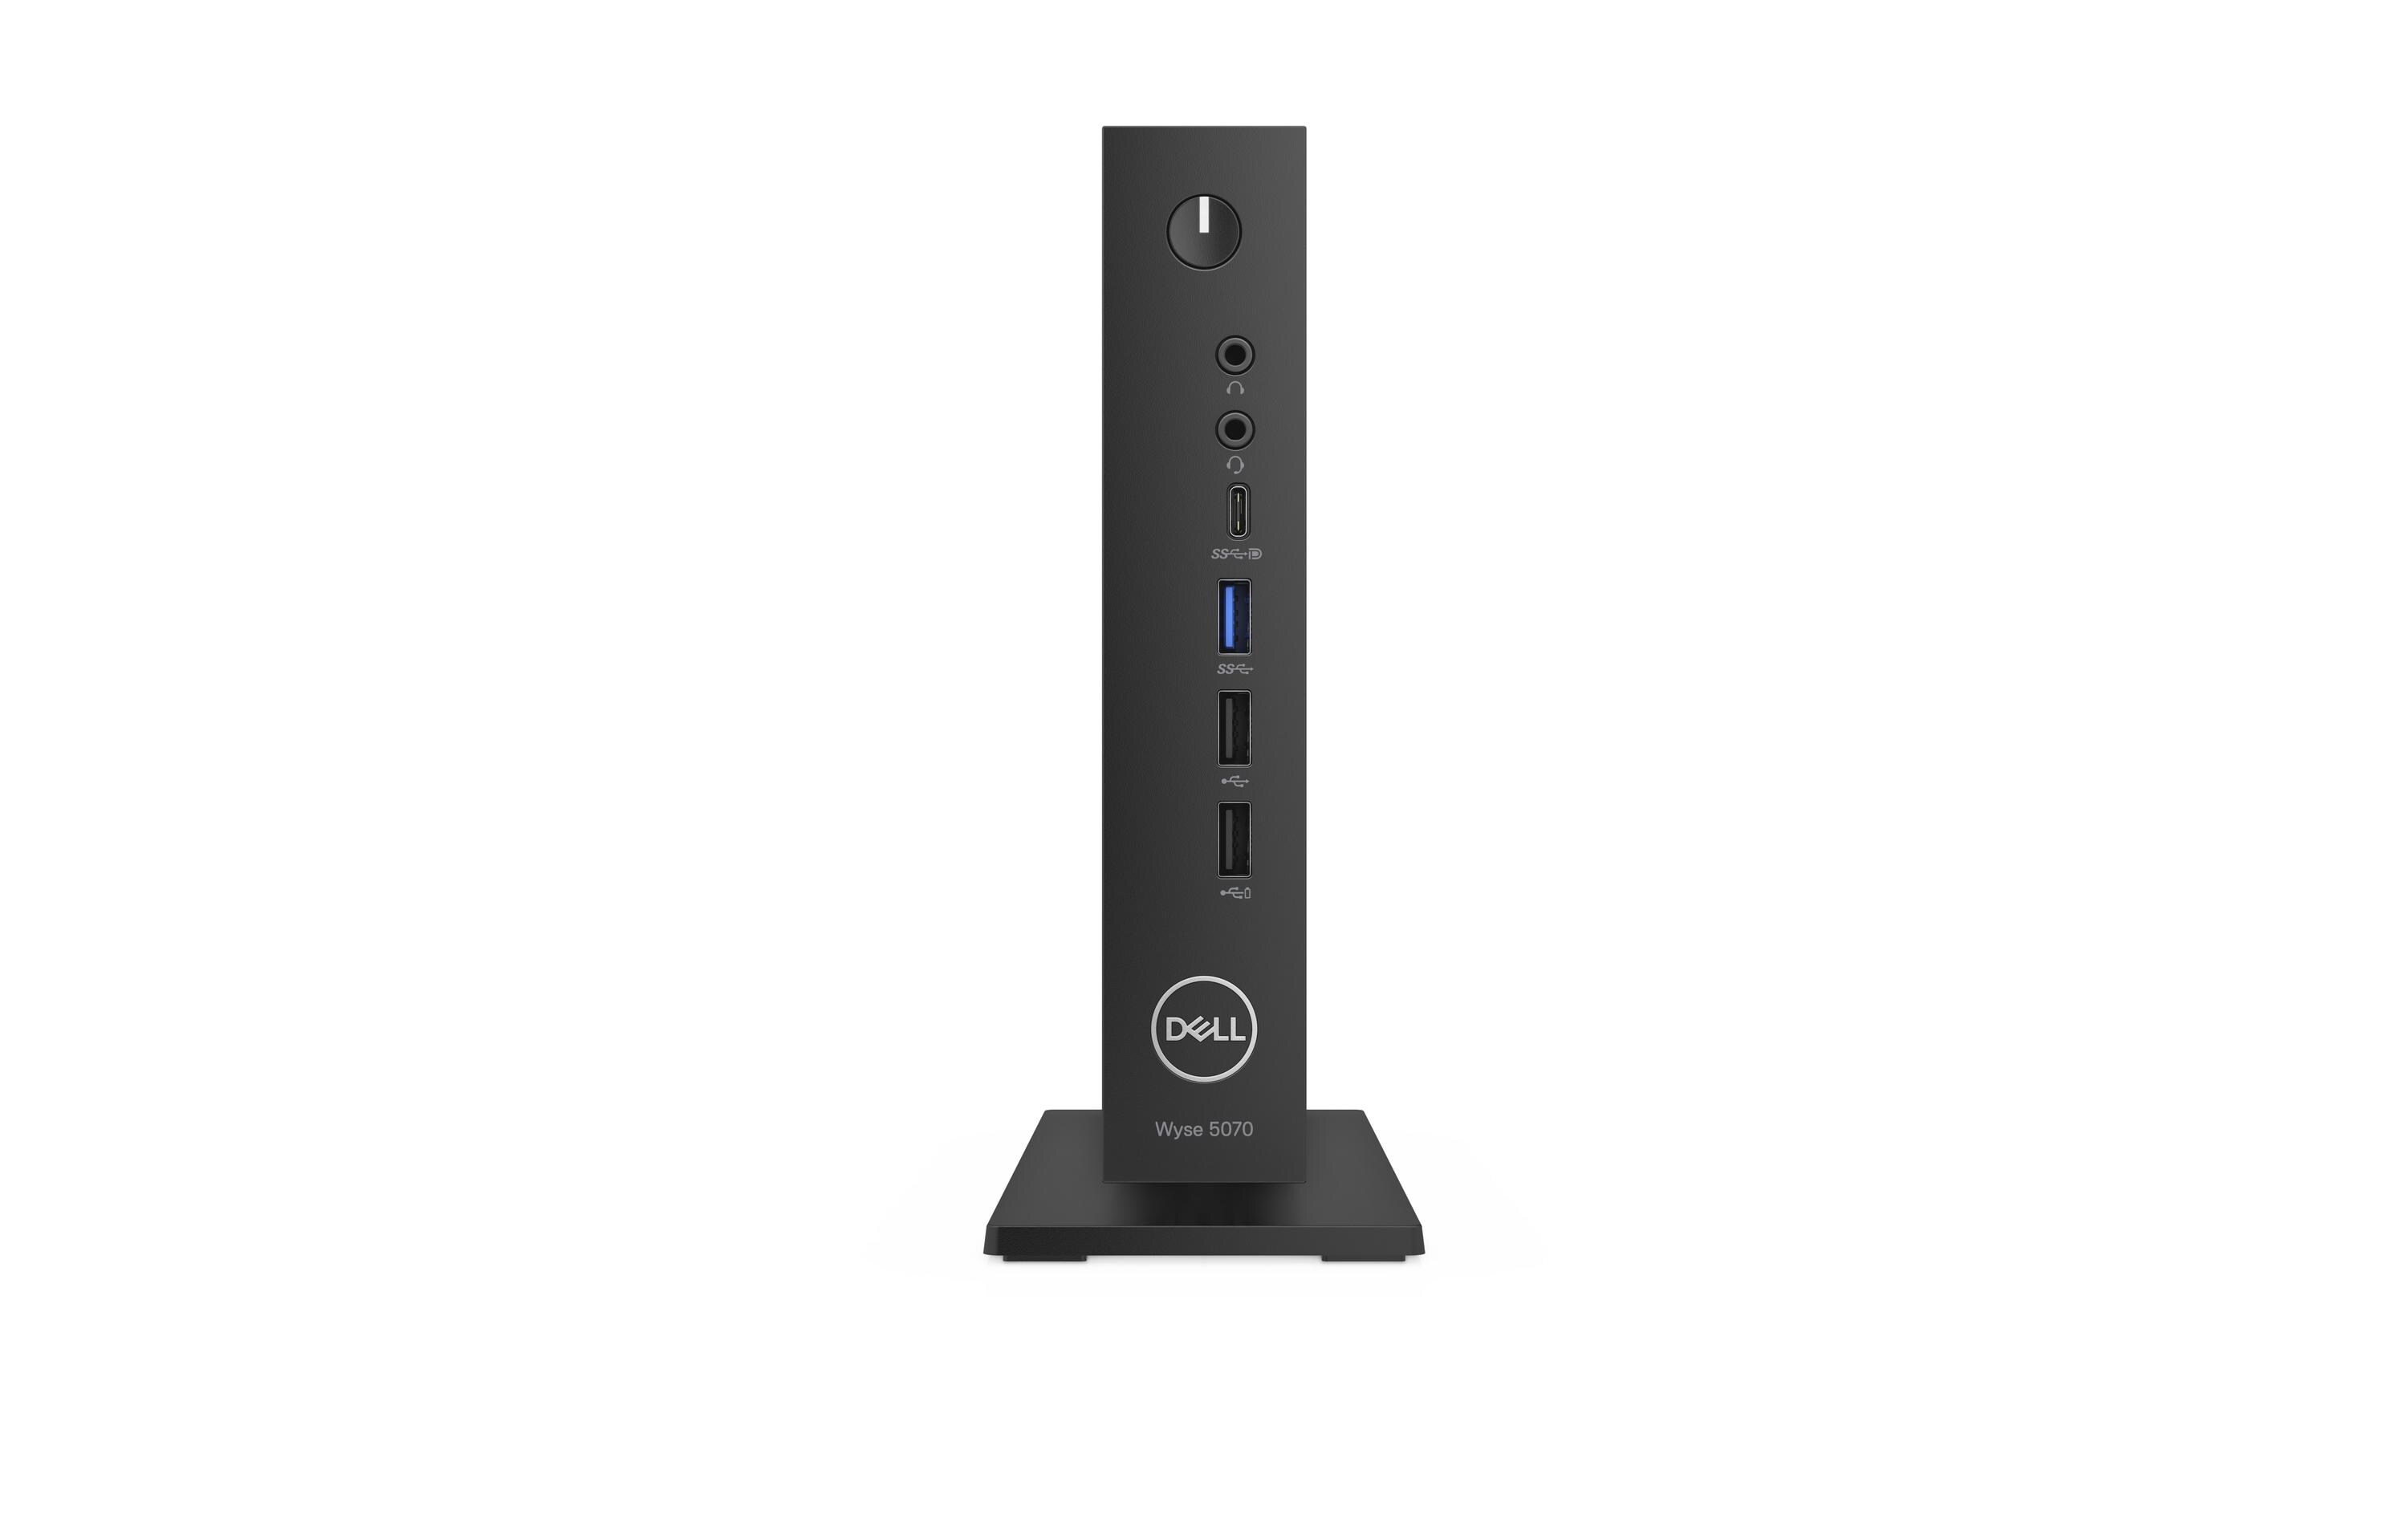 Dell Wyse 5070 ThinClient,Pent.J5005S, WIFI